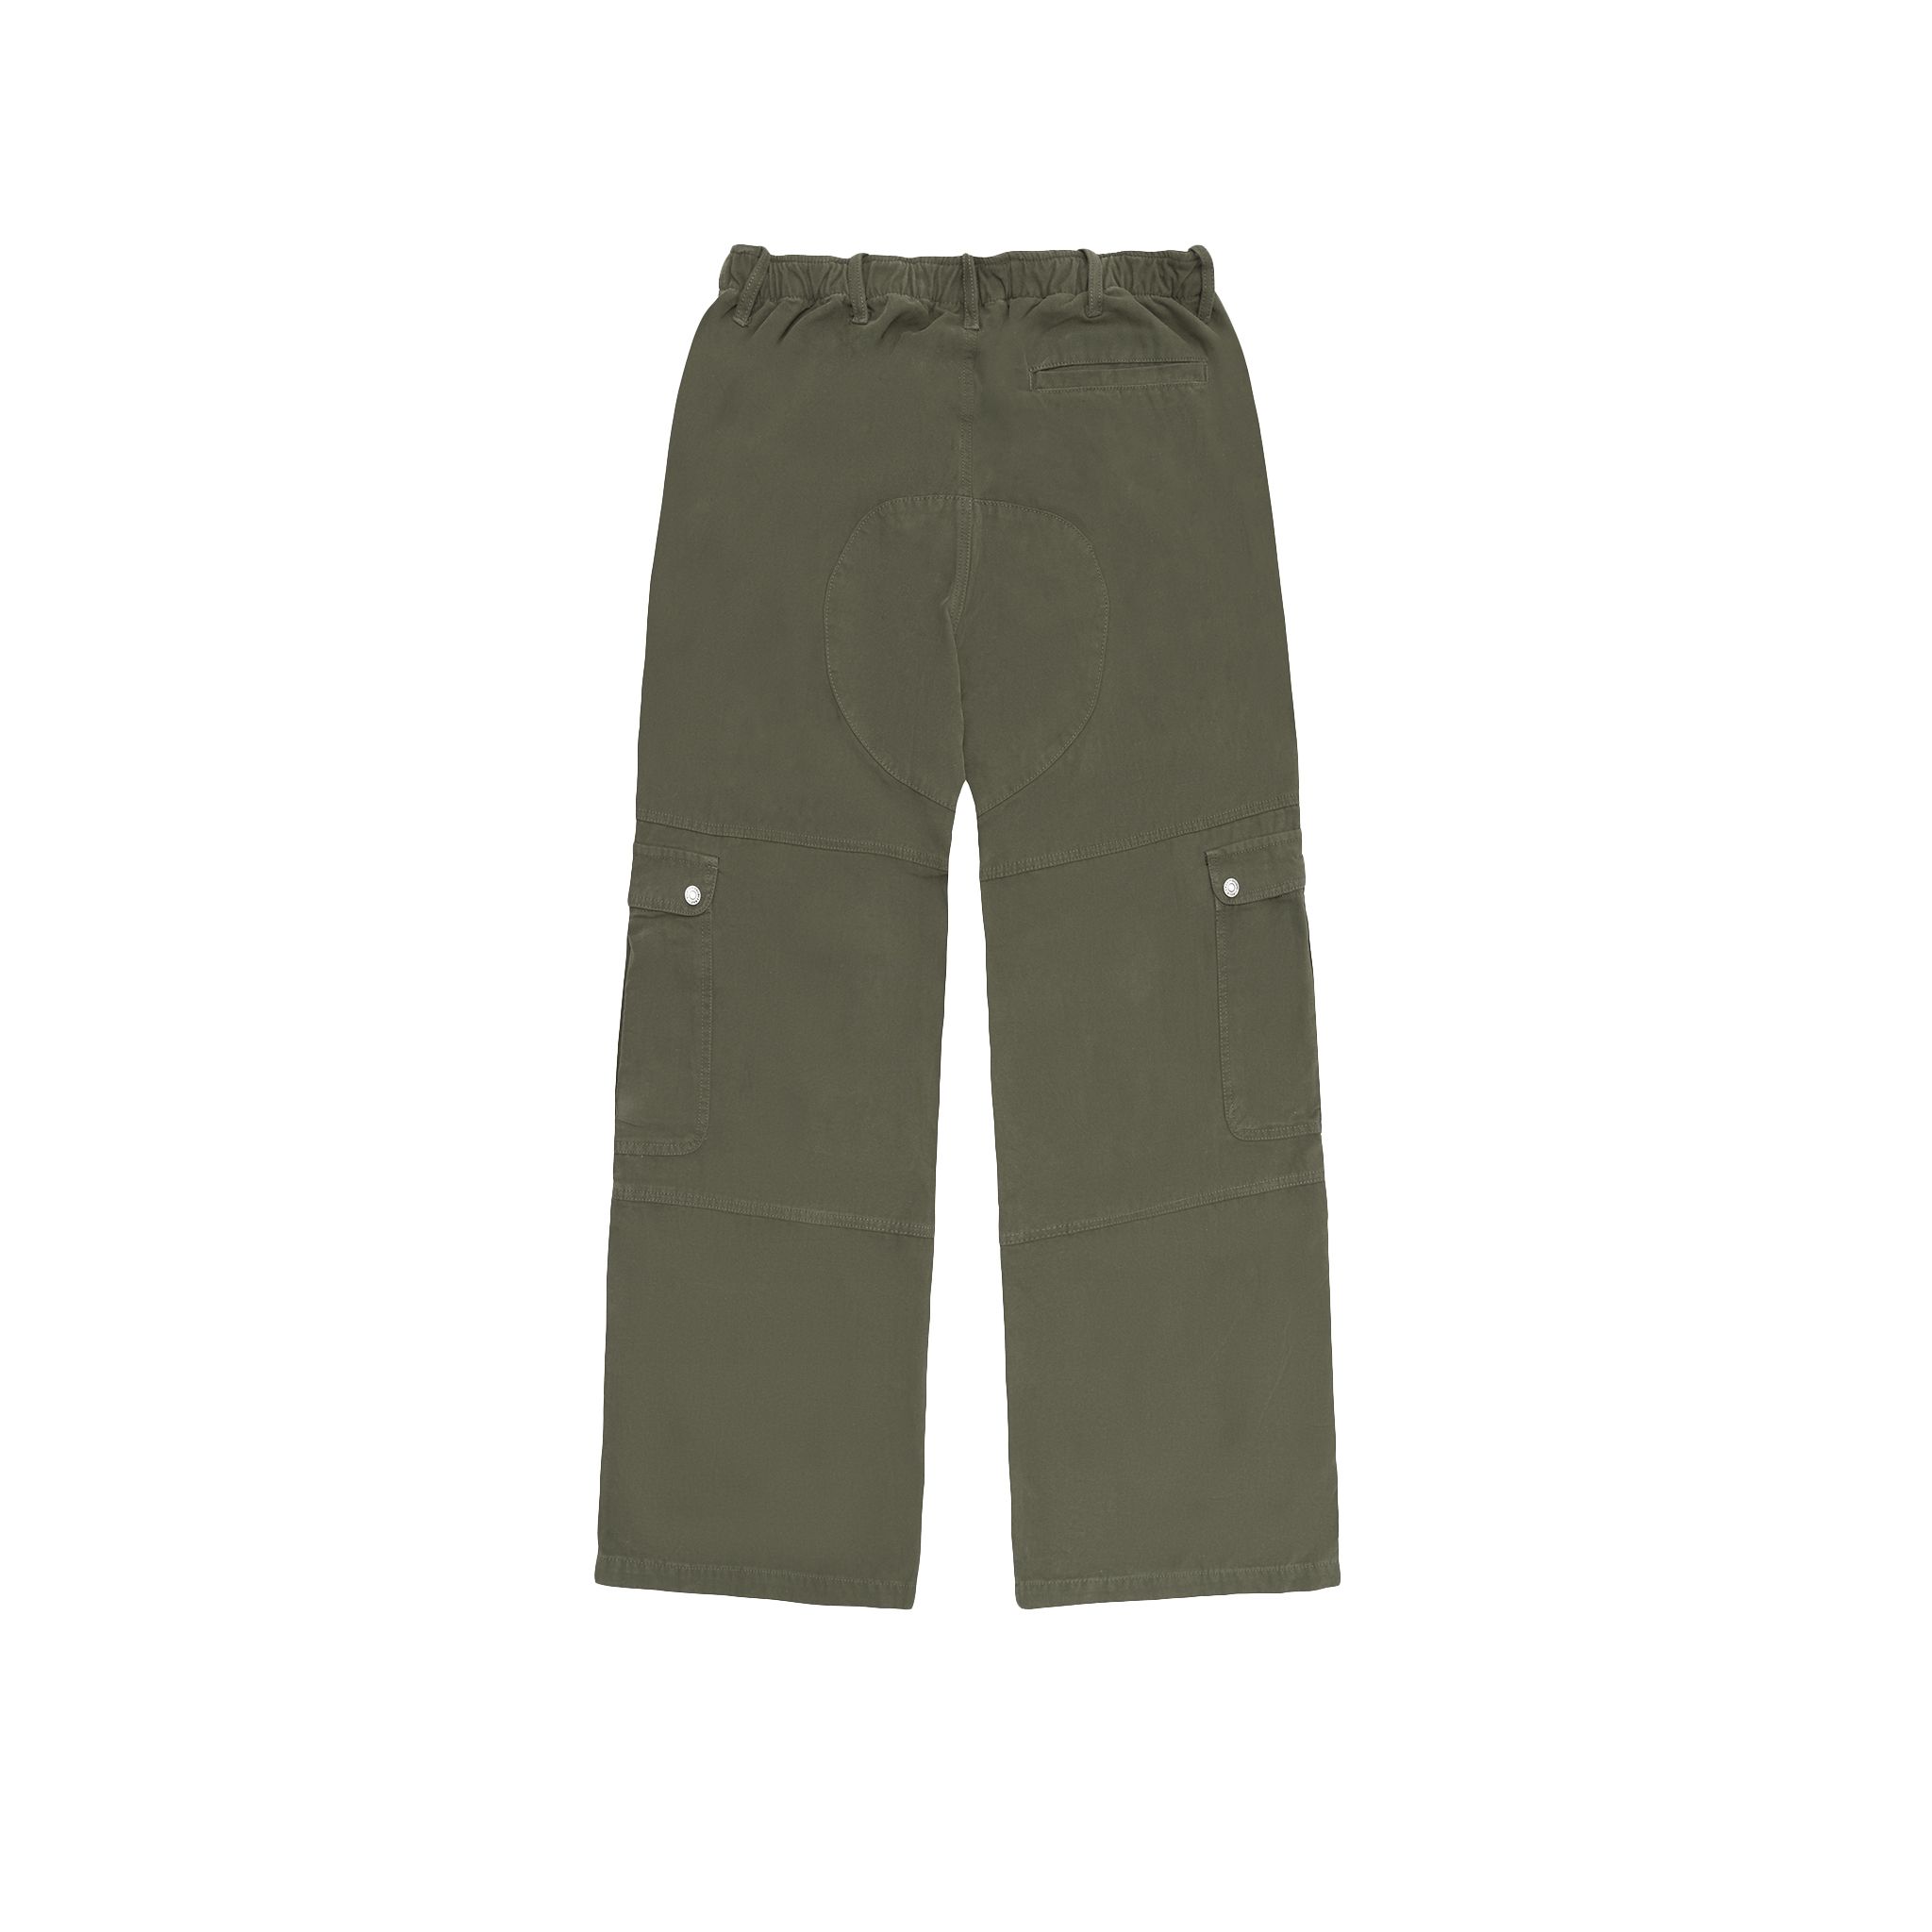 Summer Games Cargo Pants - Olive | Pants outfit men, Street fashion men  streetwear, Cool outfits for men